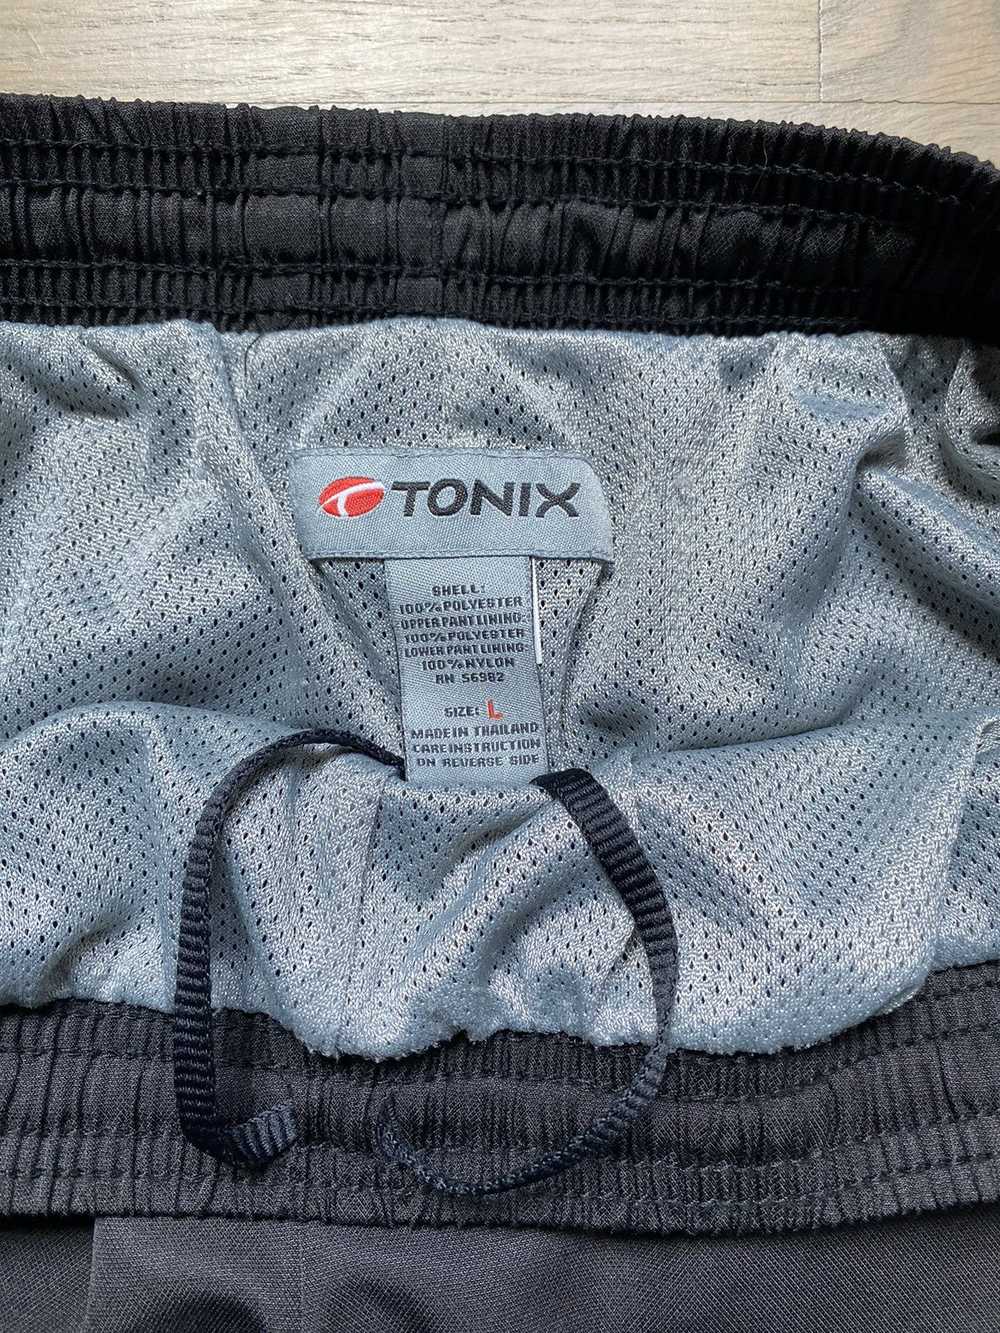 Other × Vintage Tonix Joggers - image 5